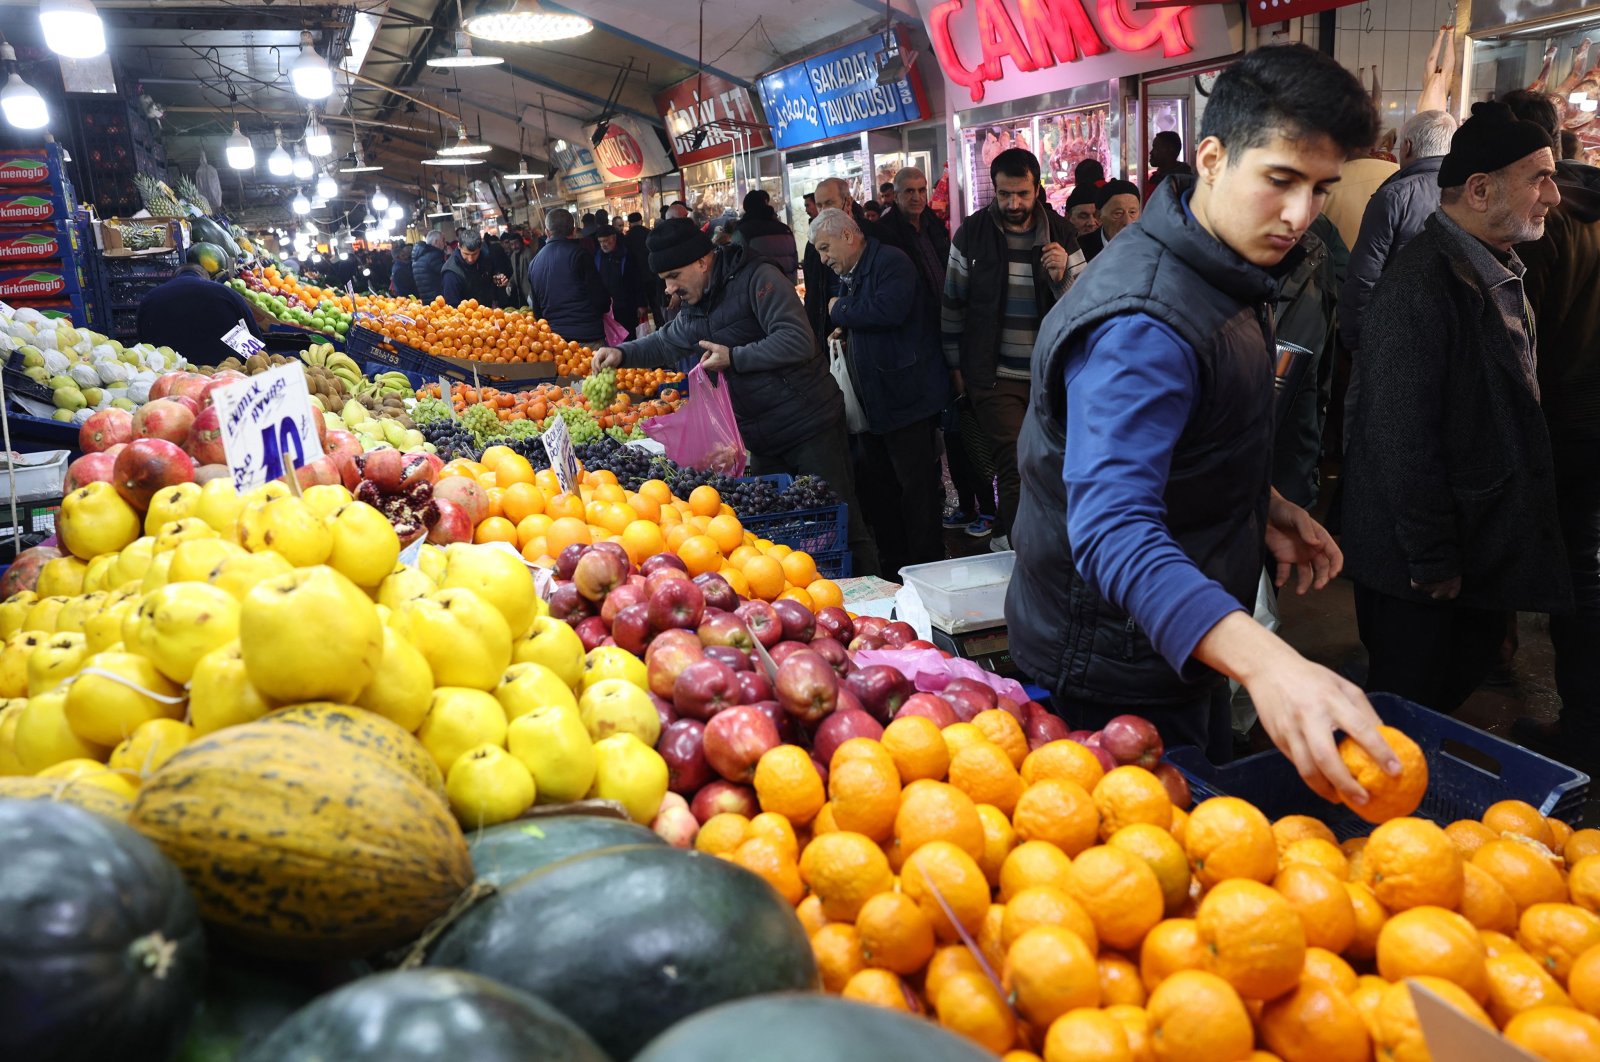 Customers buy vegetables and fruits at a public market in the historical district of Ulus in Ankara, Türkiye, Dec. 30, 2022. (AFP Photo)